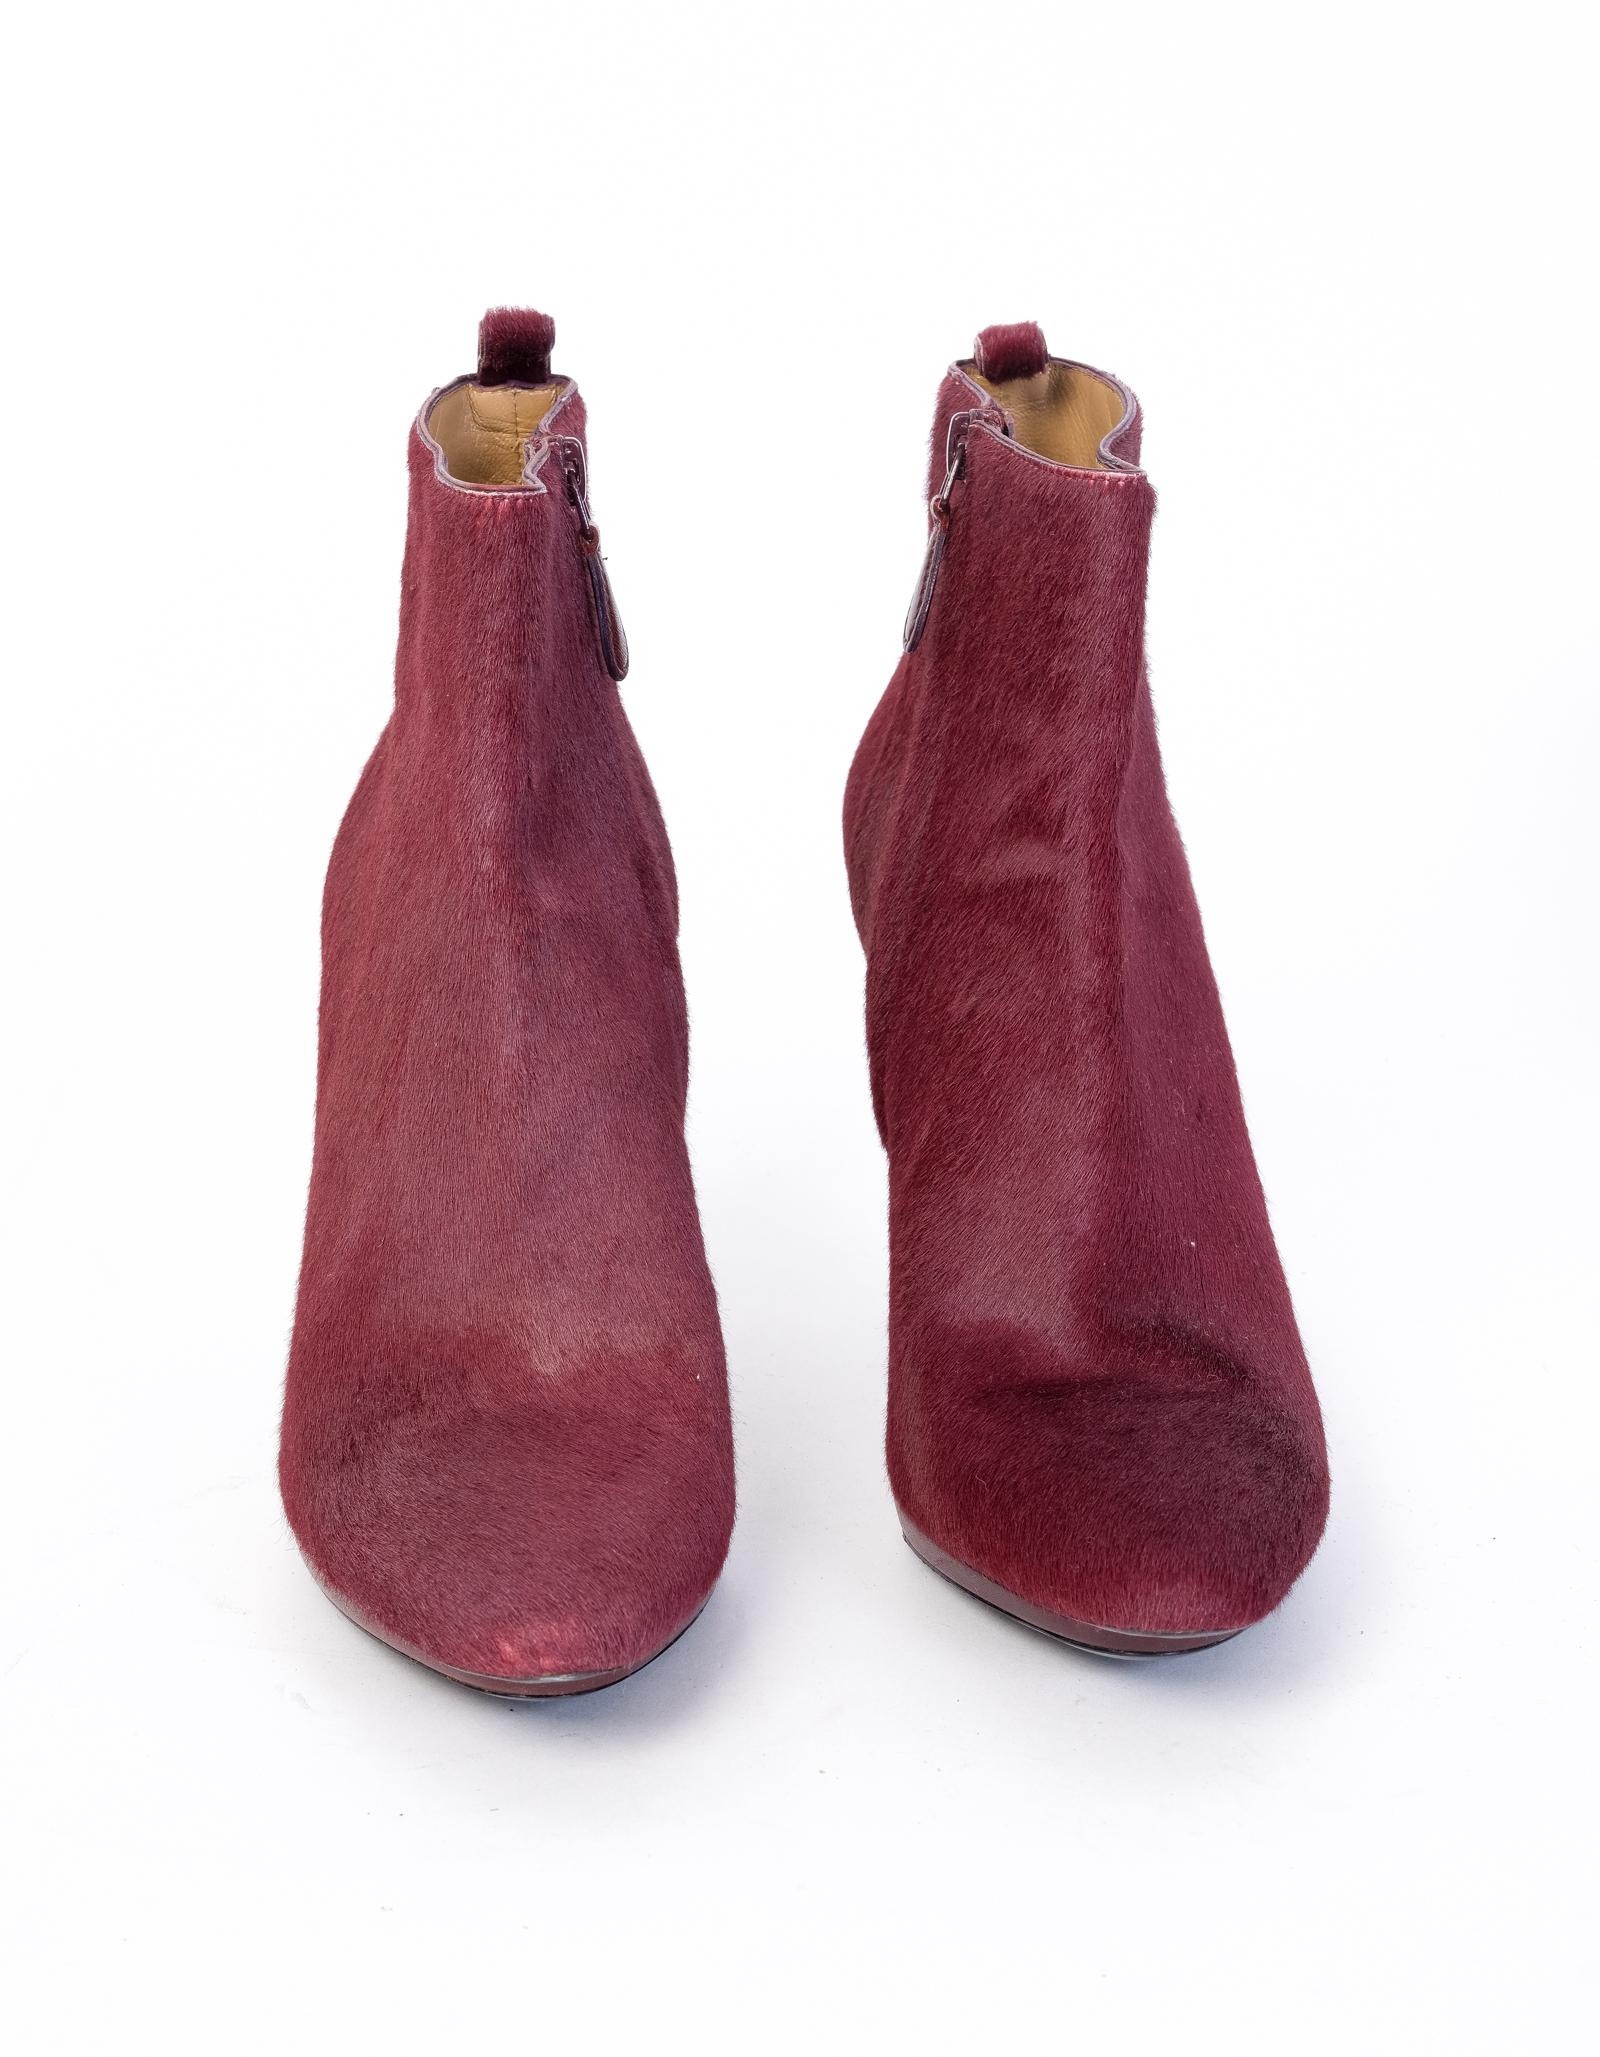 These heels feature a burgundy calf hair exterior, a light brown leather interior, a 4.24 inch heel, and black soles.

COLOR: Burgundy
MATERIAL: Calf hair
ITEM CODE: 299974
SIZE: 40 EU / 9 US
HEEL HEIGHT: 110 mm (4.25 inches)
EST. RETAIL $1100
COMES